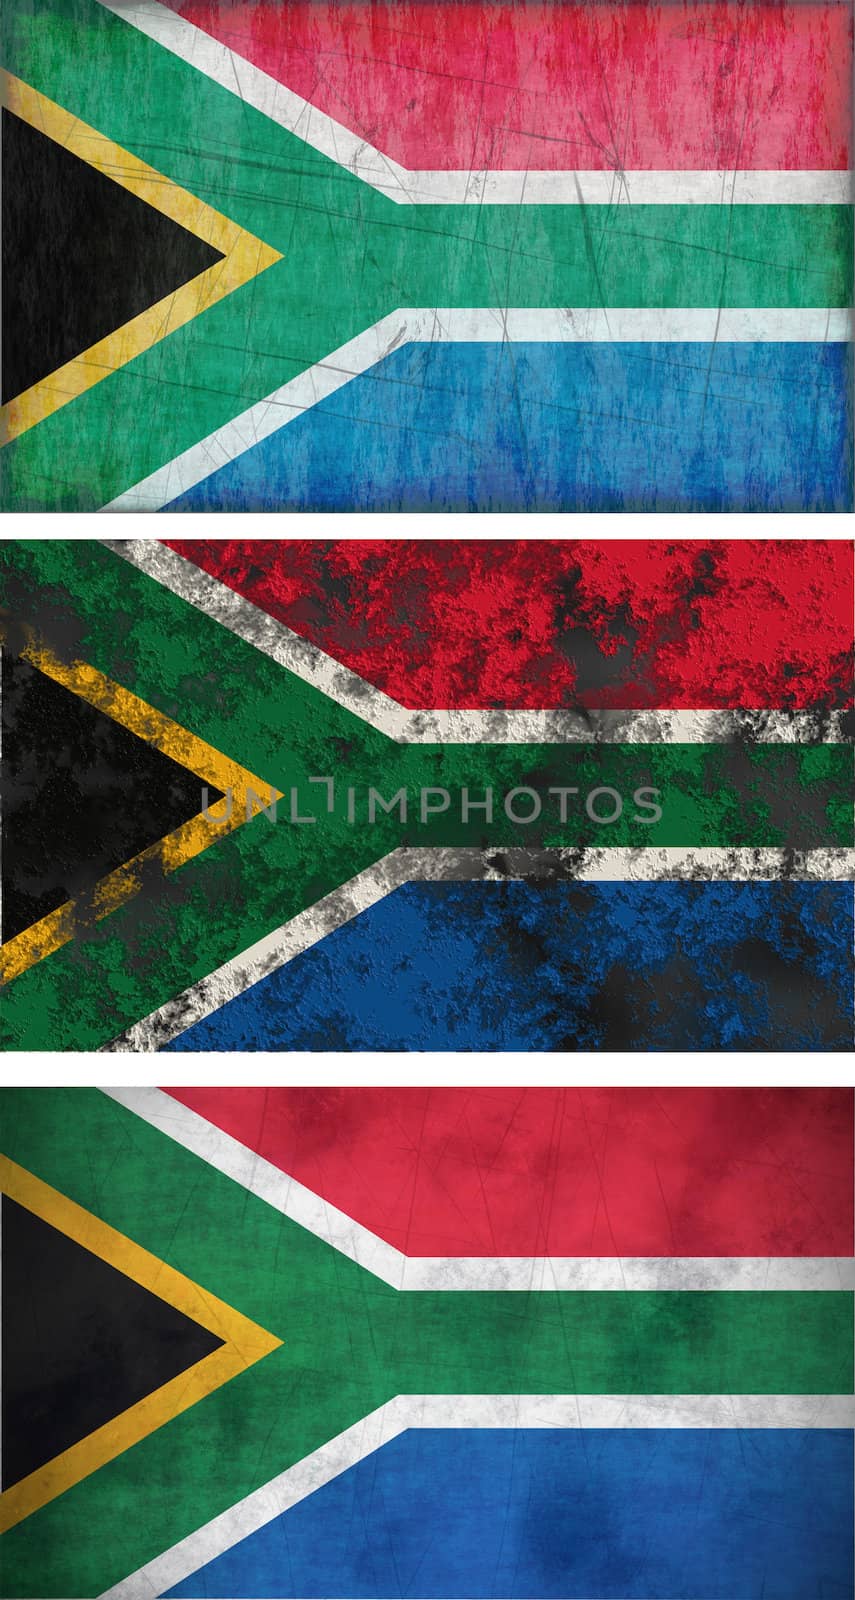 Great Image of the Flag of South Africa